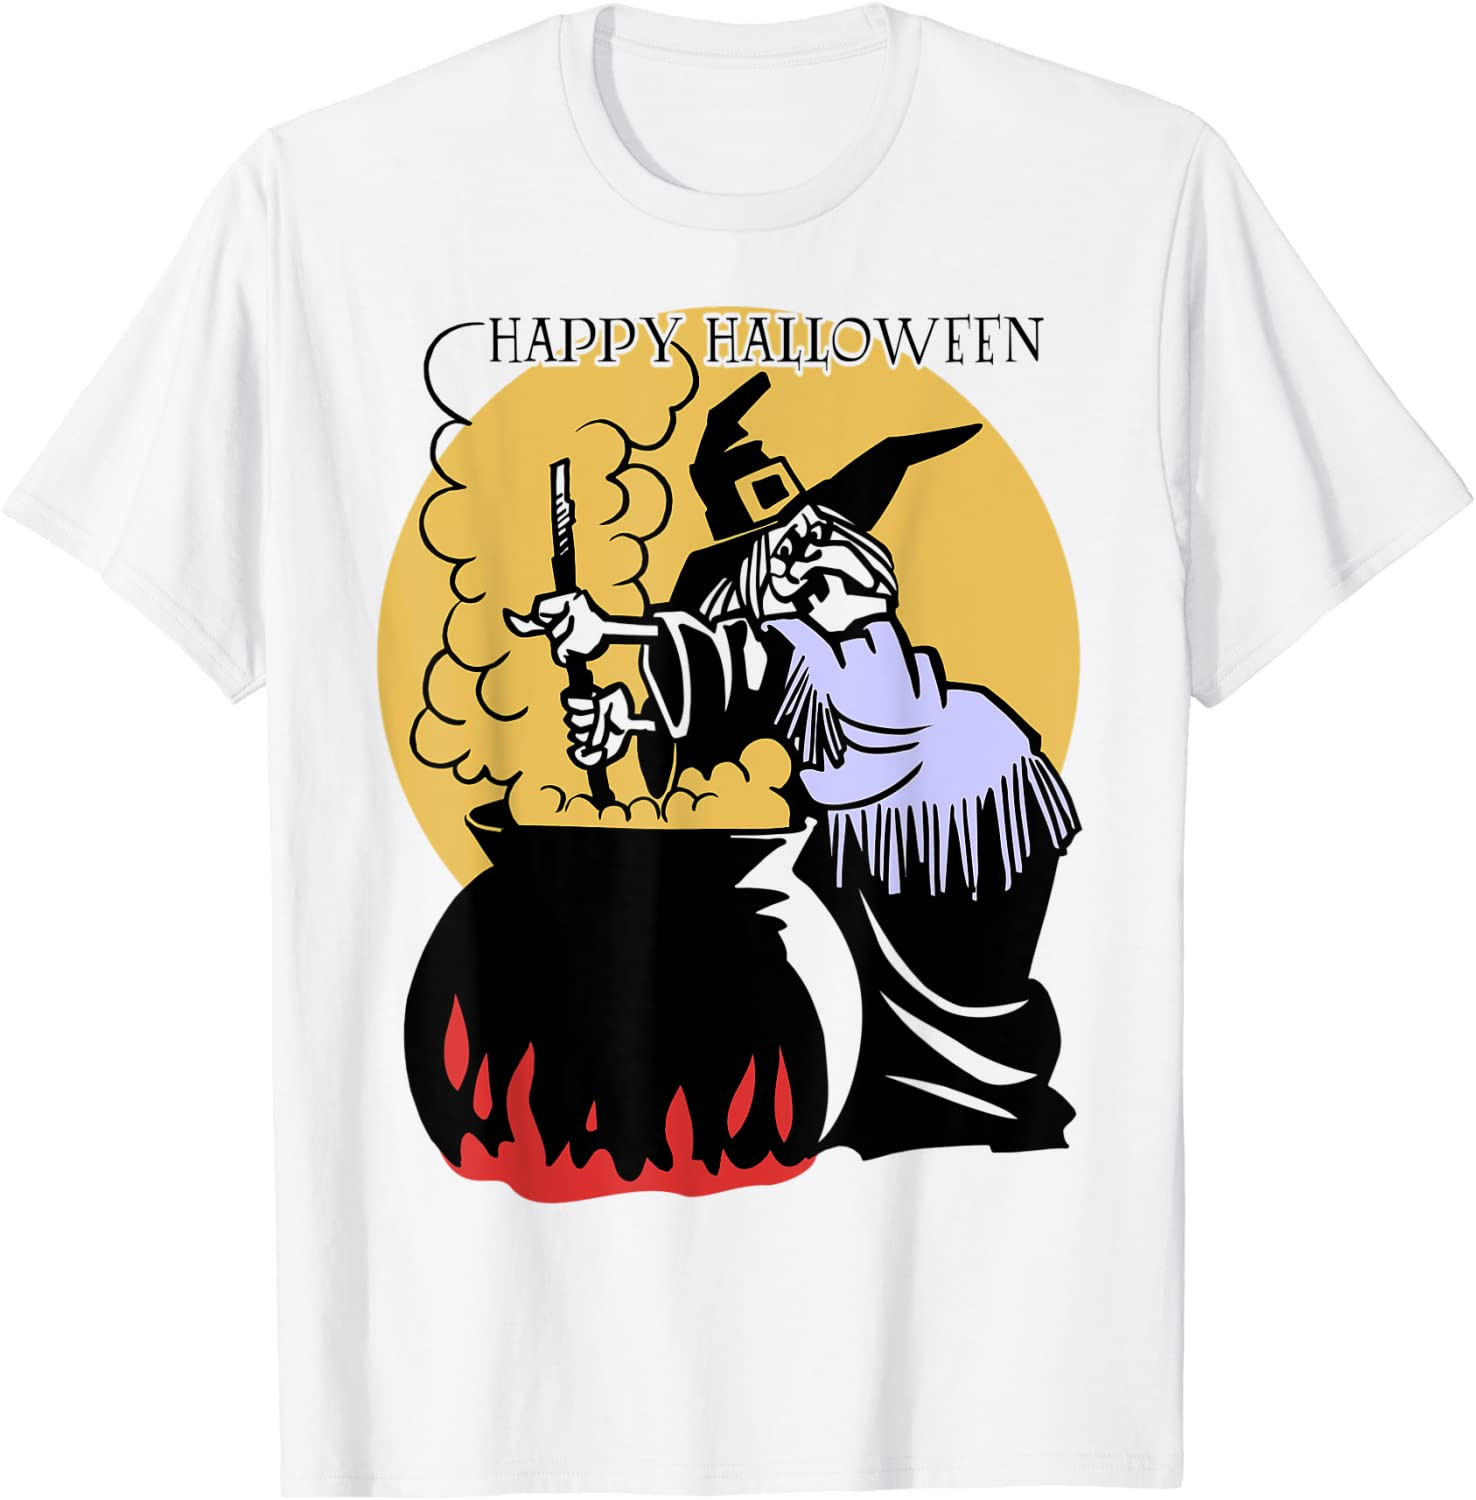 Happy Halloween Spooky Witch And Cauldron Costume T-Shirt